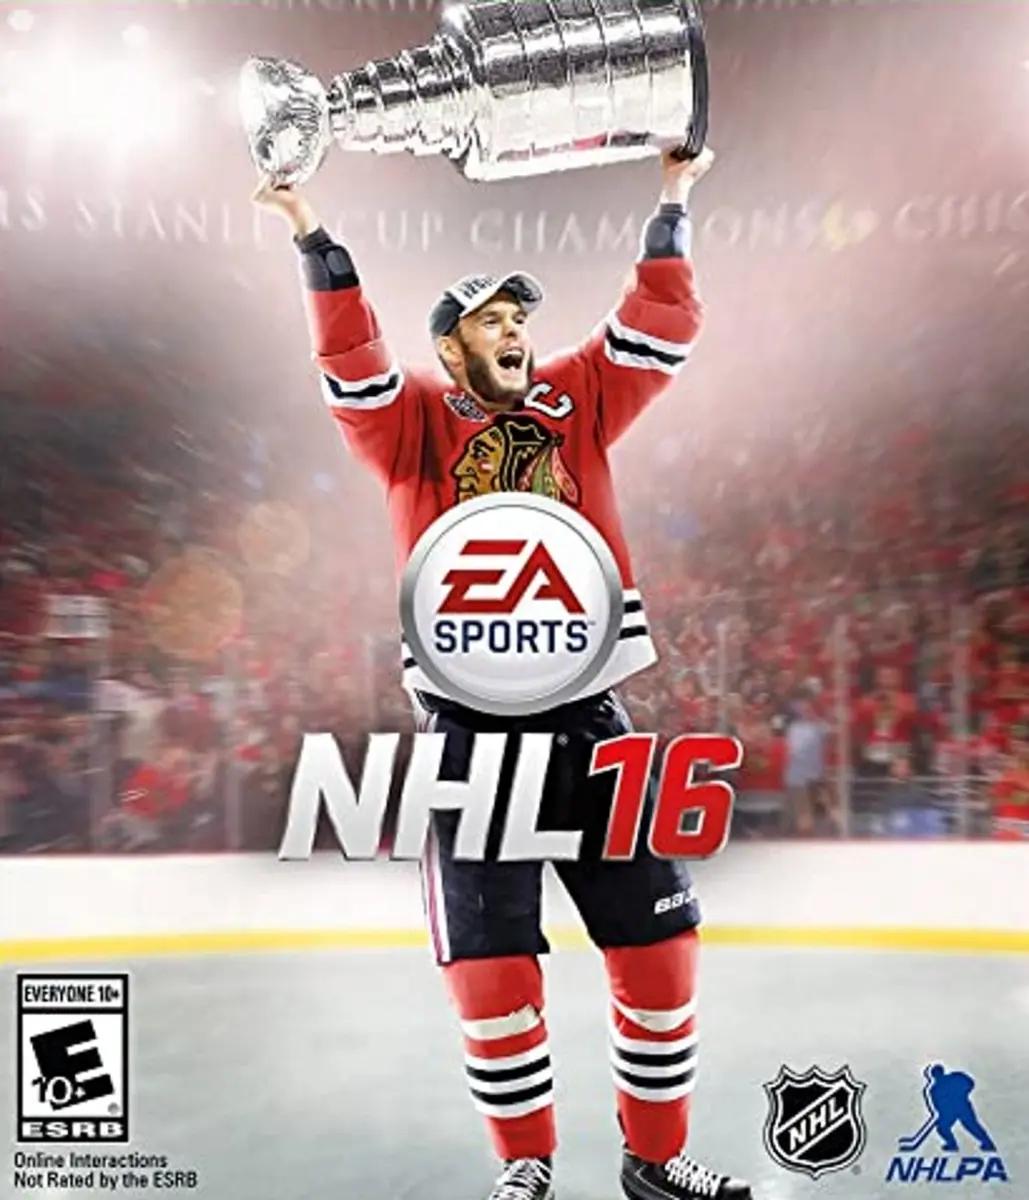 Jonathan Toews on the NHL 16 cover.